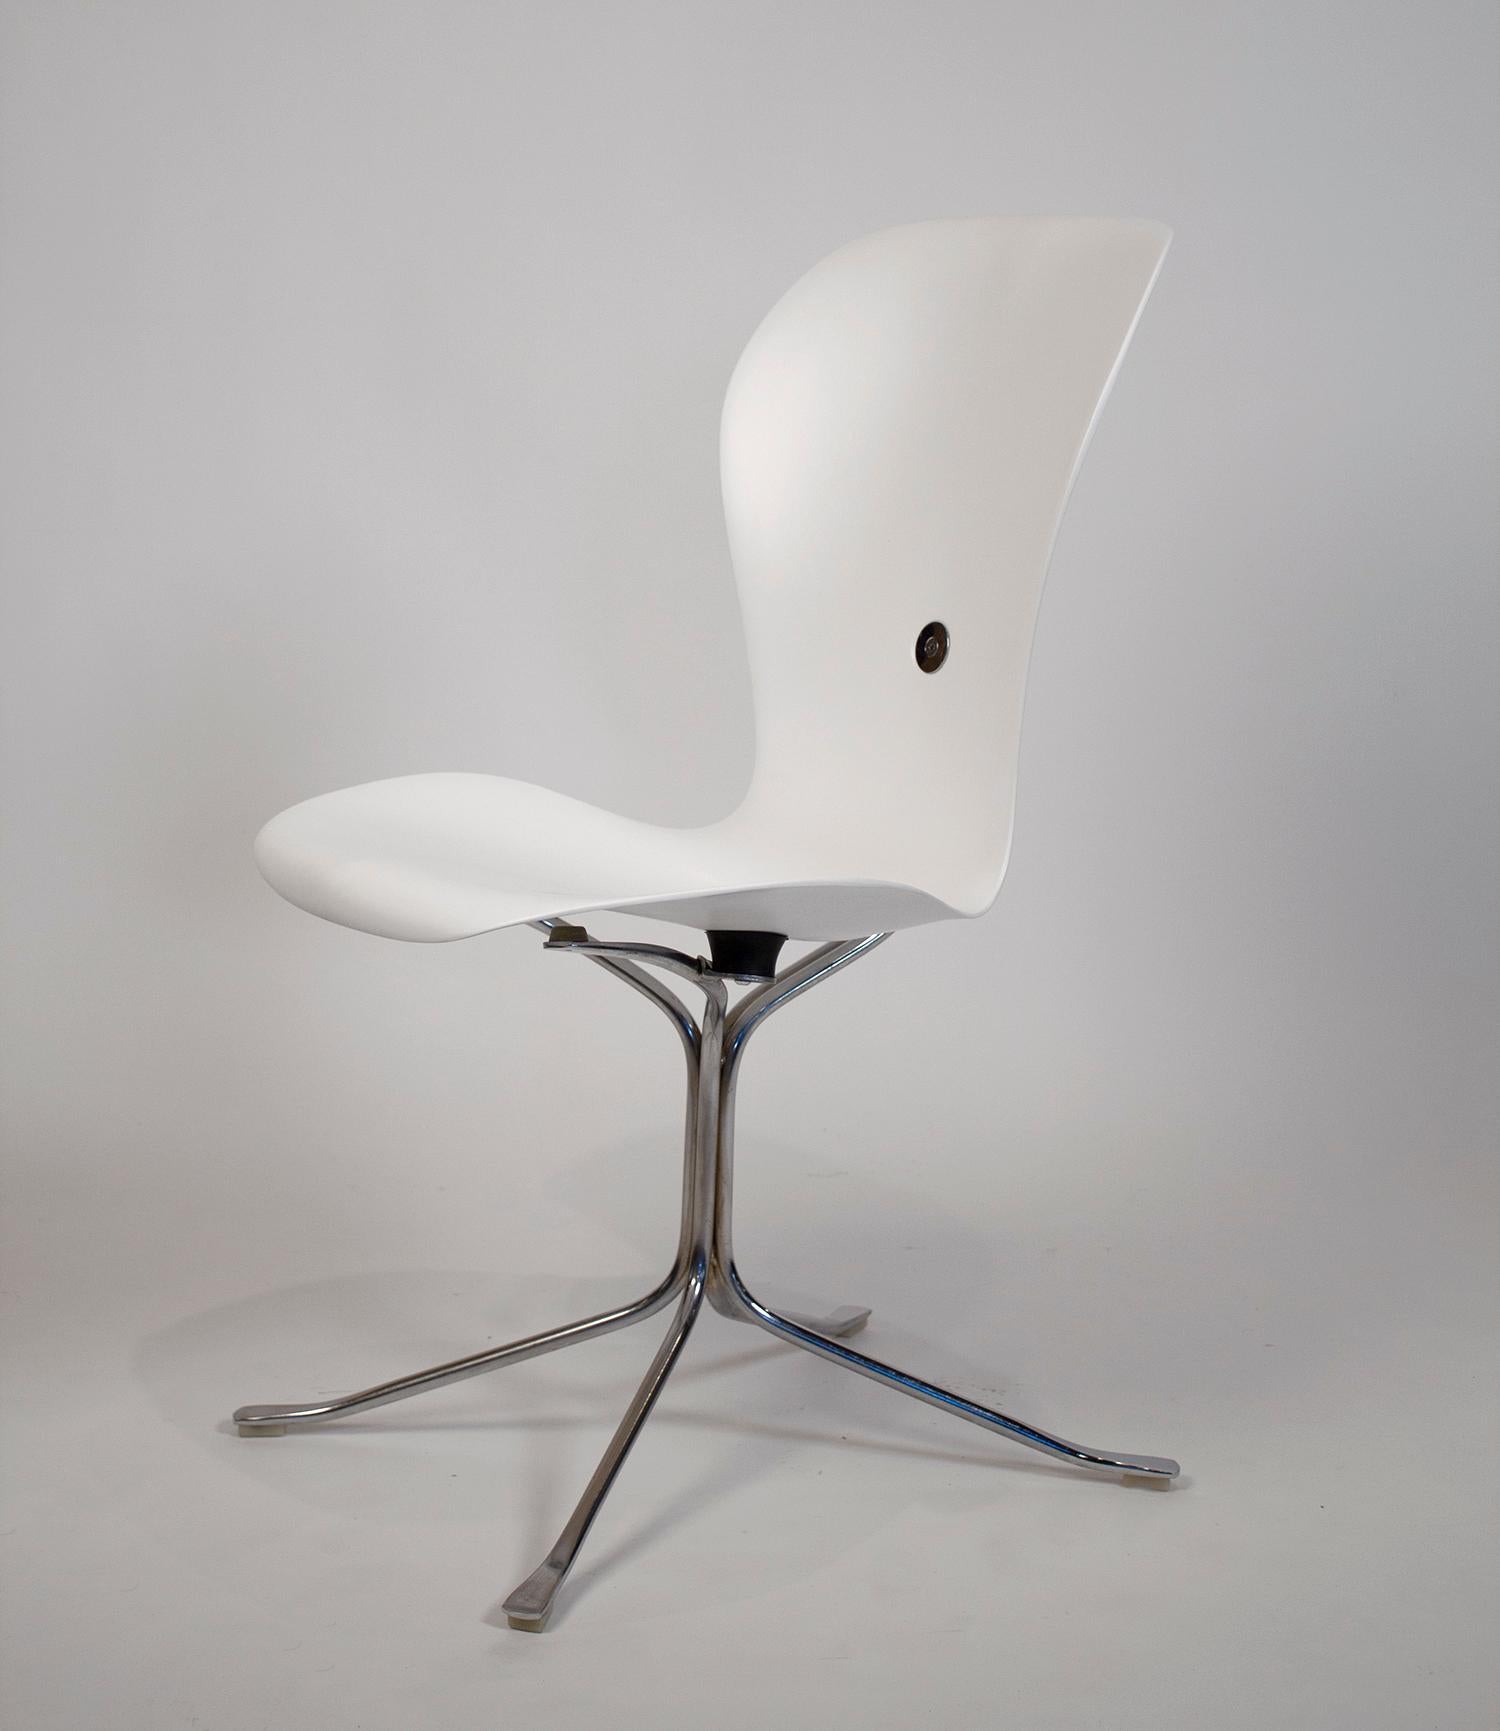 The Ion chair, also known as the space needle chair, was designed for the observation deck of the space needle at the Seattle World's fair in 1962. This set of six chairs was professionally painted in a flat crisp white lacquer and is in excellent